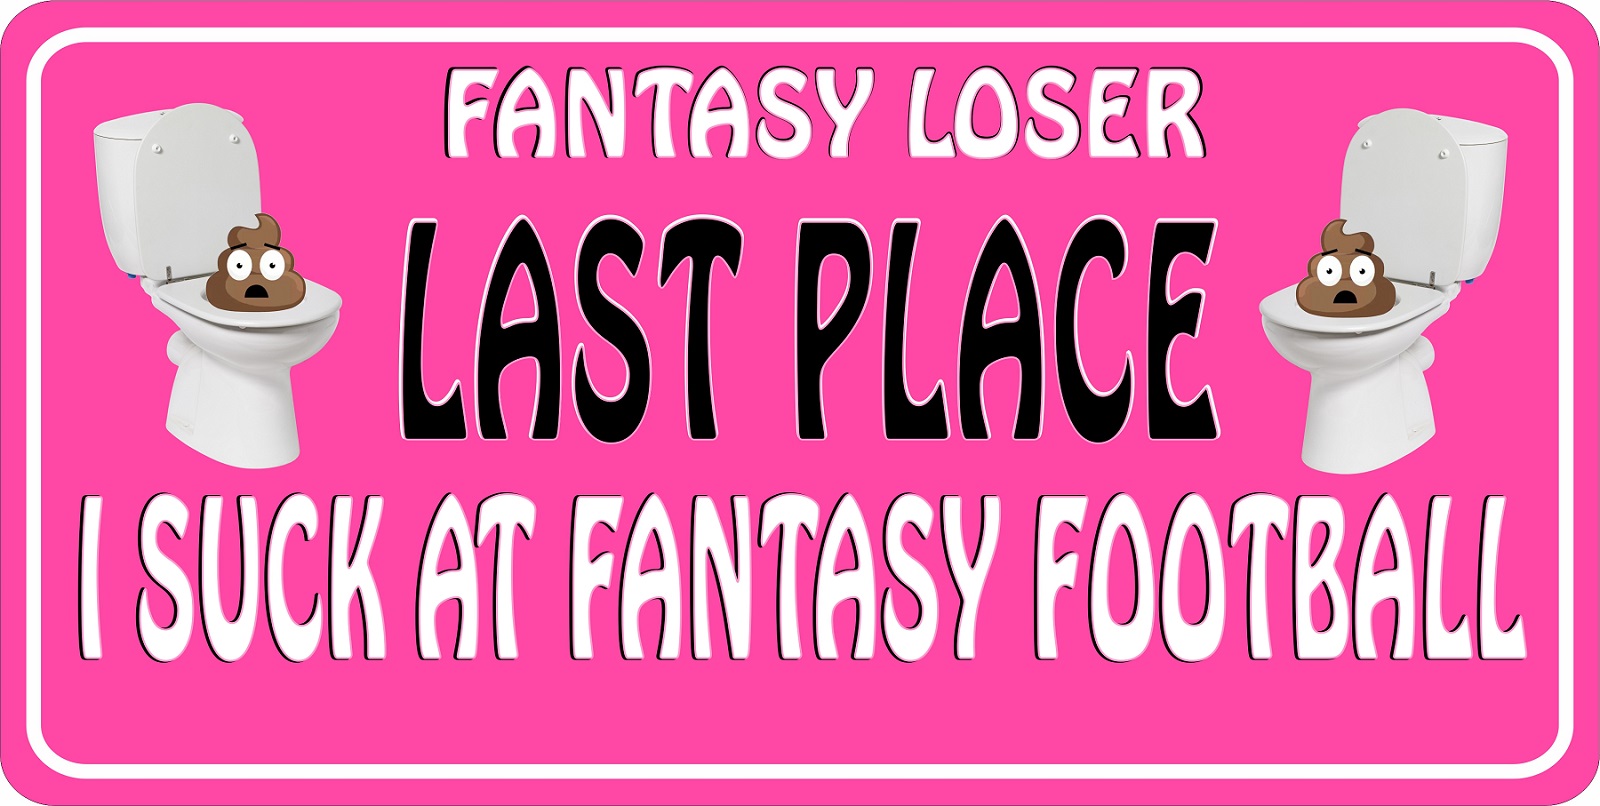 Fantasy Football Loser Last Place Pink Photo LICENSE PLATE